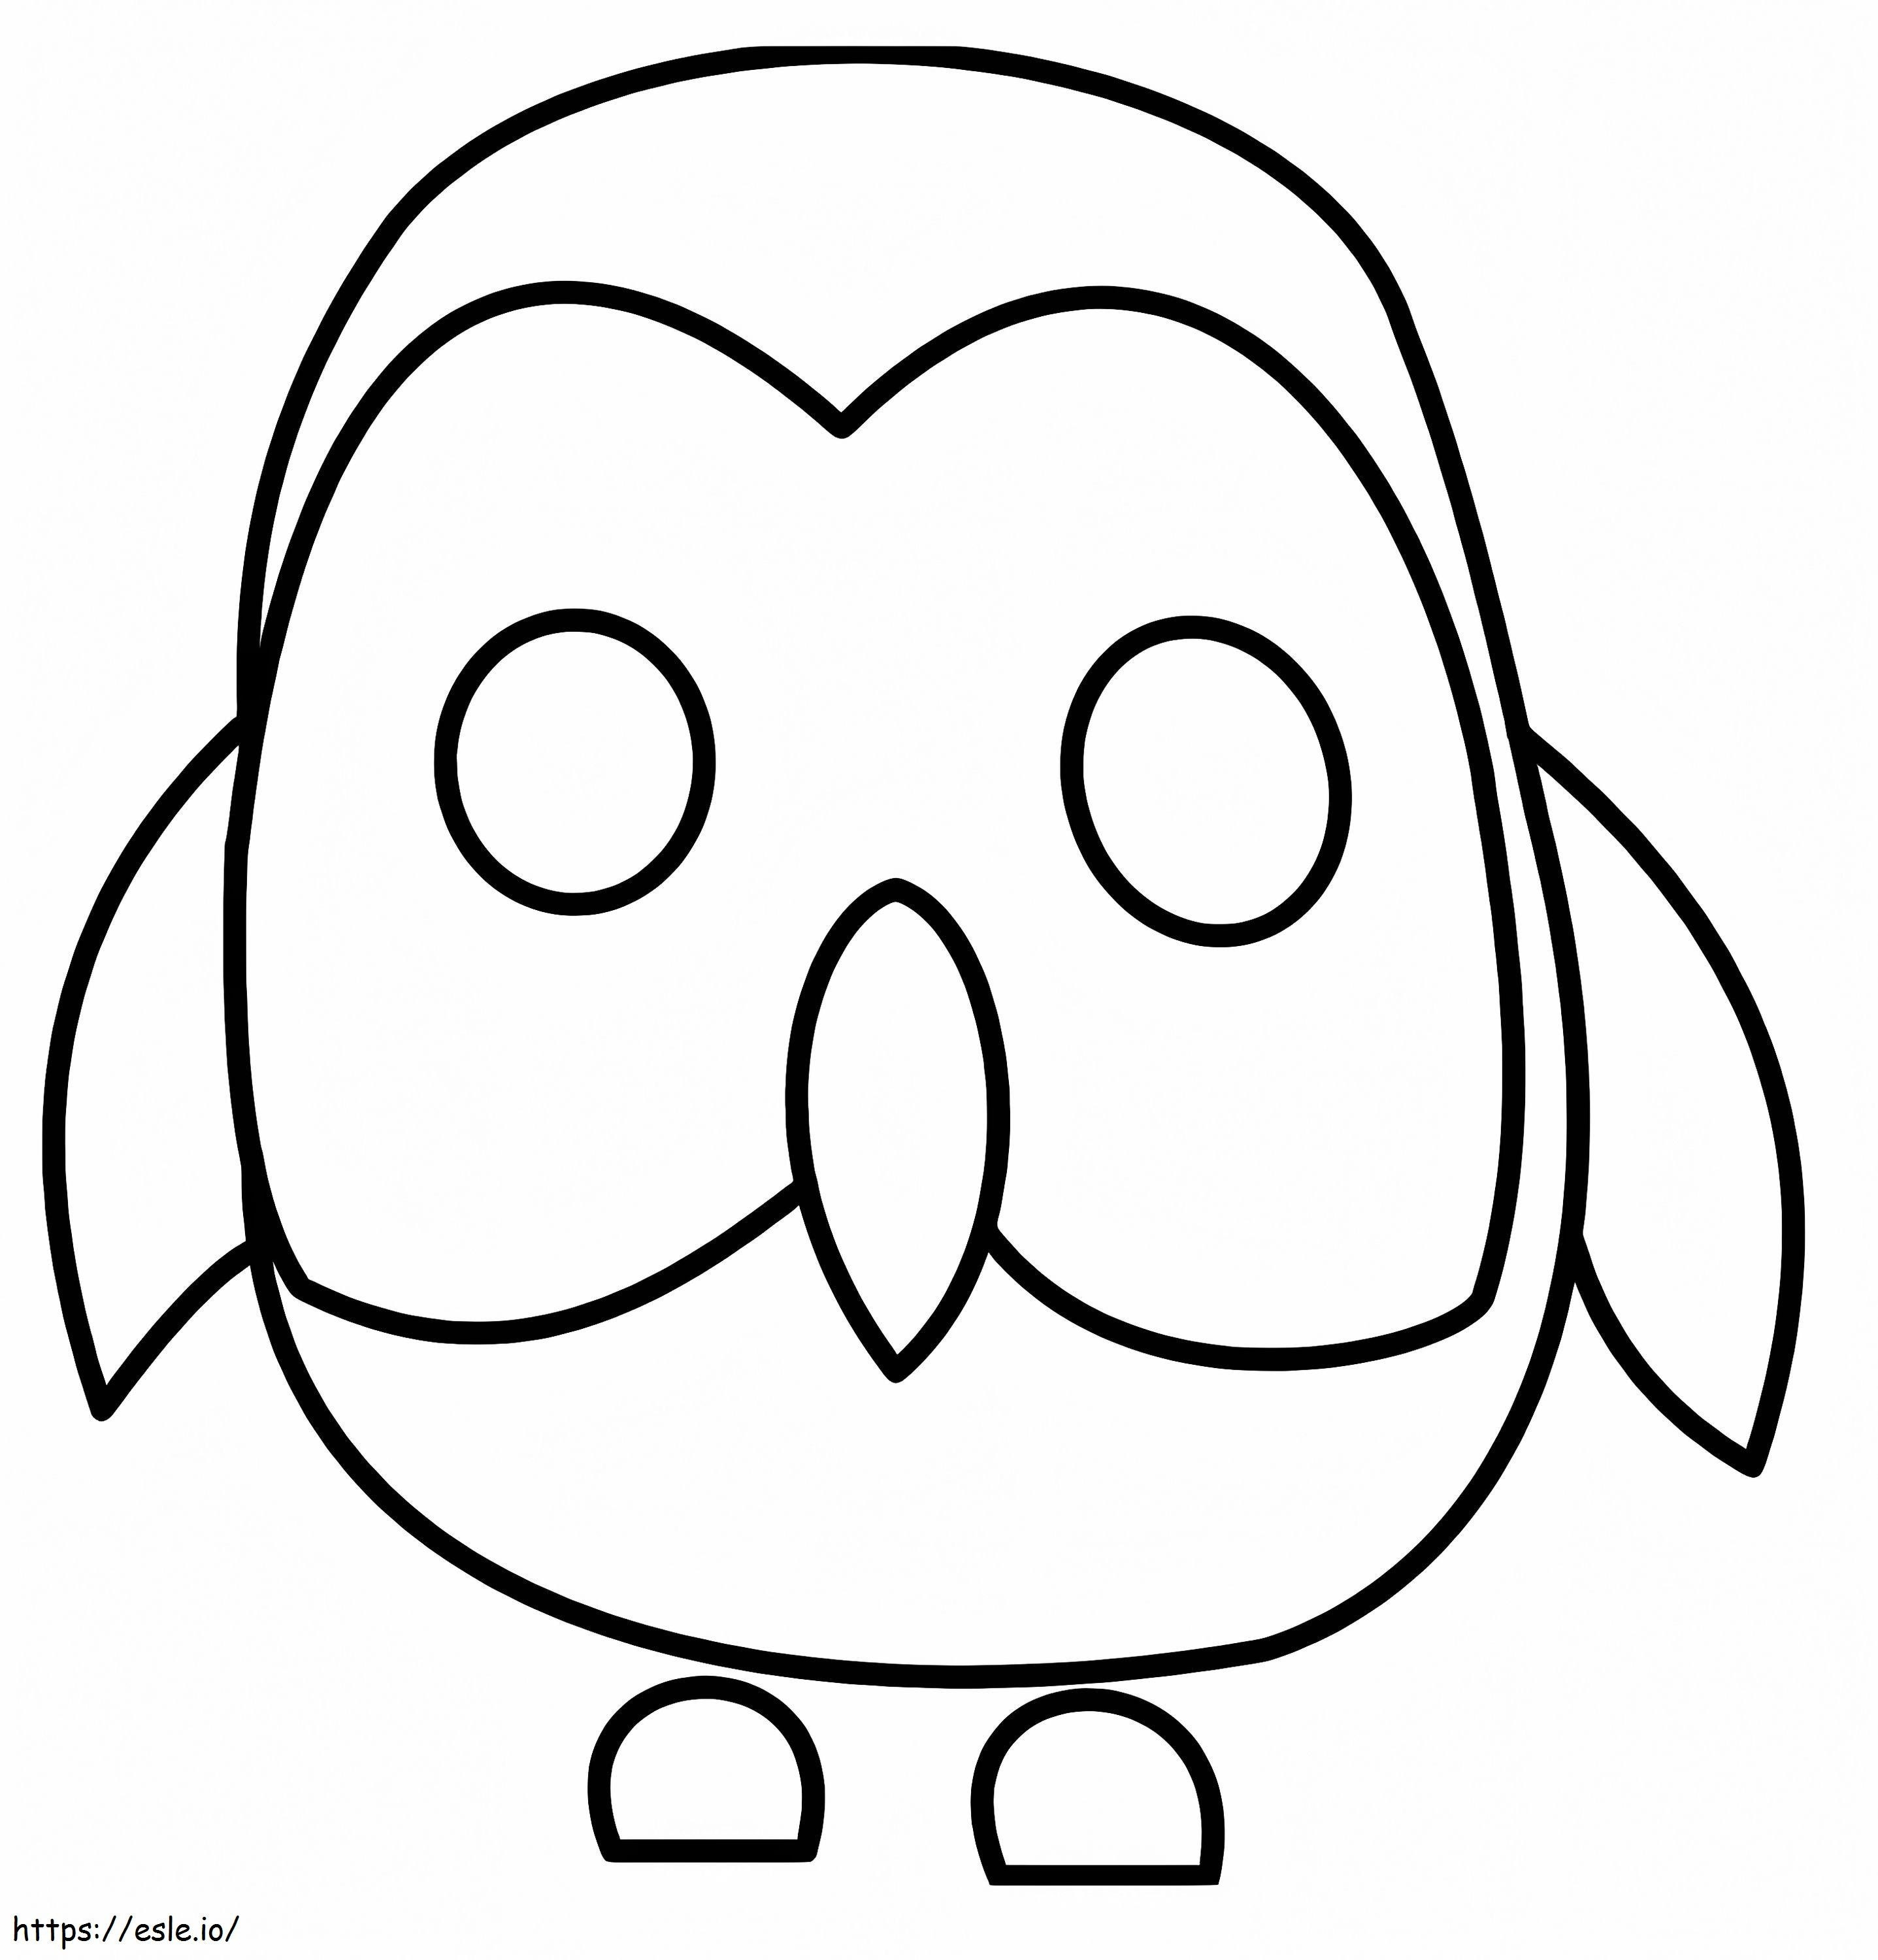 Owl Adopt Me coloring page